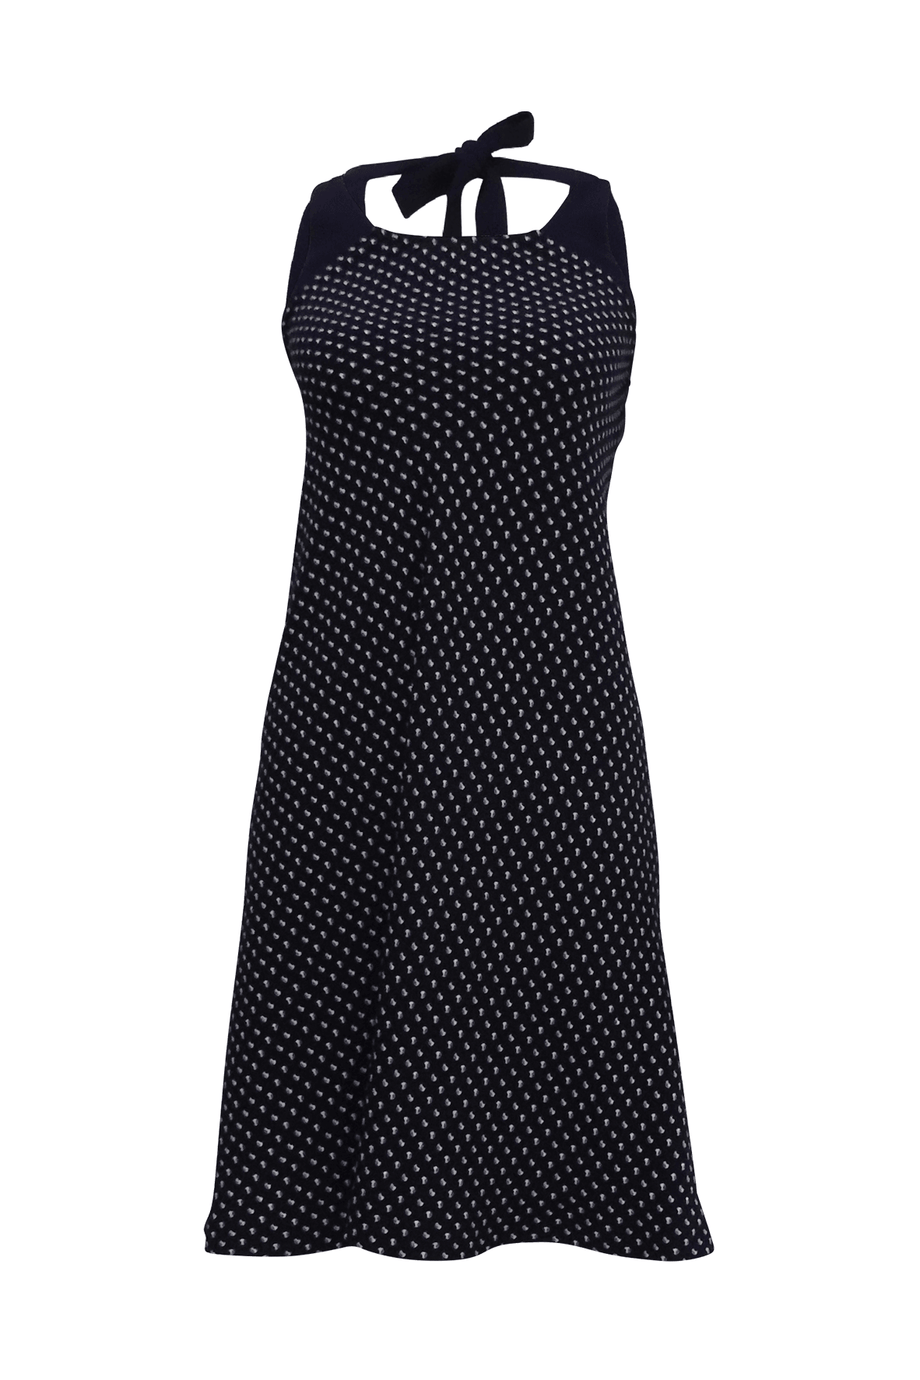 Buy Authentic, Preloved Armani Exchange Halter Patterned Dress from Second  Edit by Style Theory